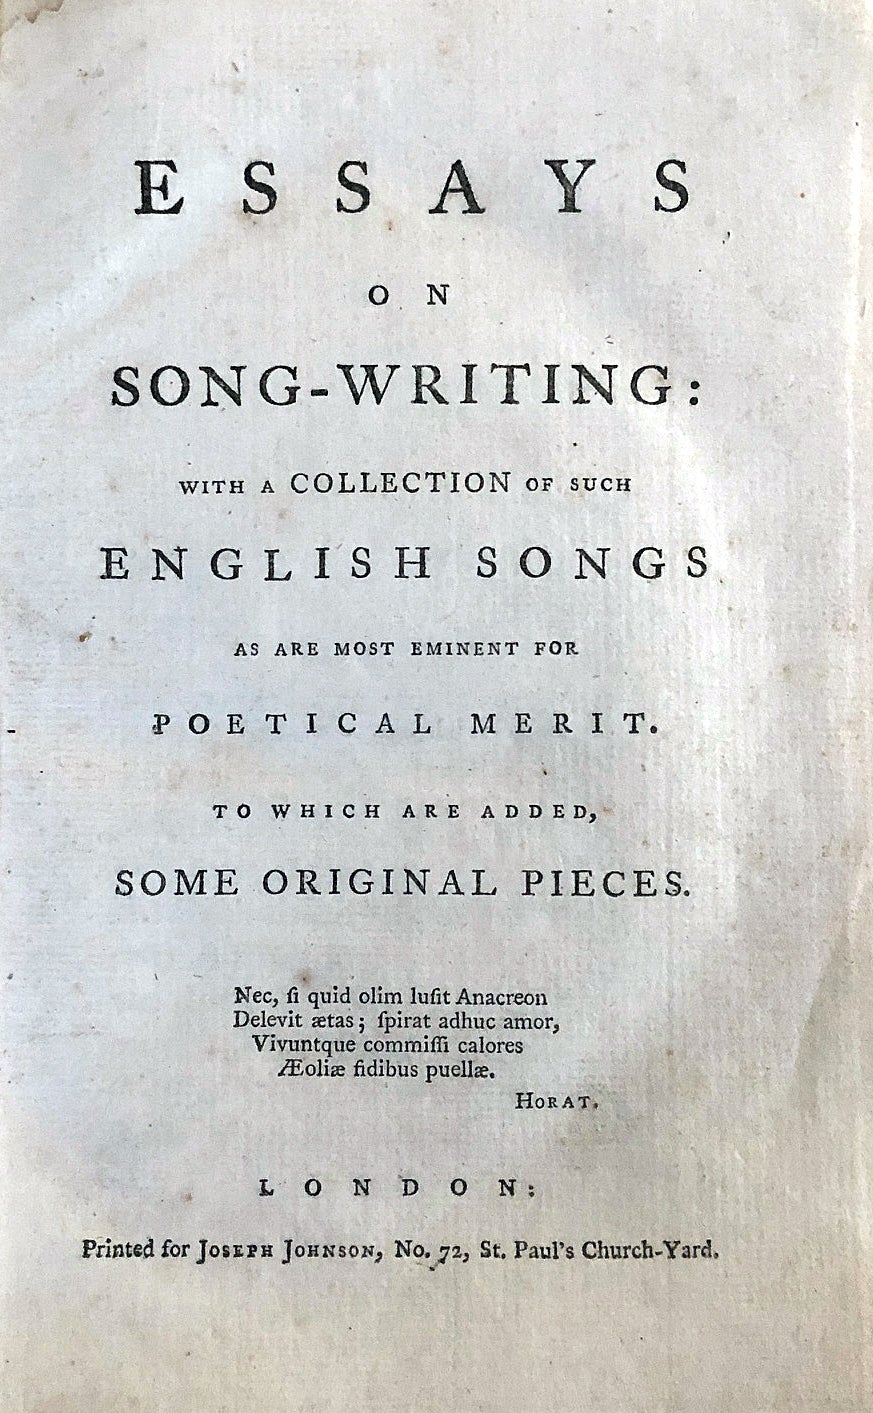 song names in essays